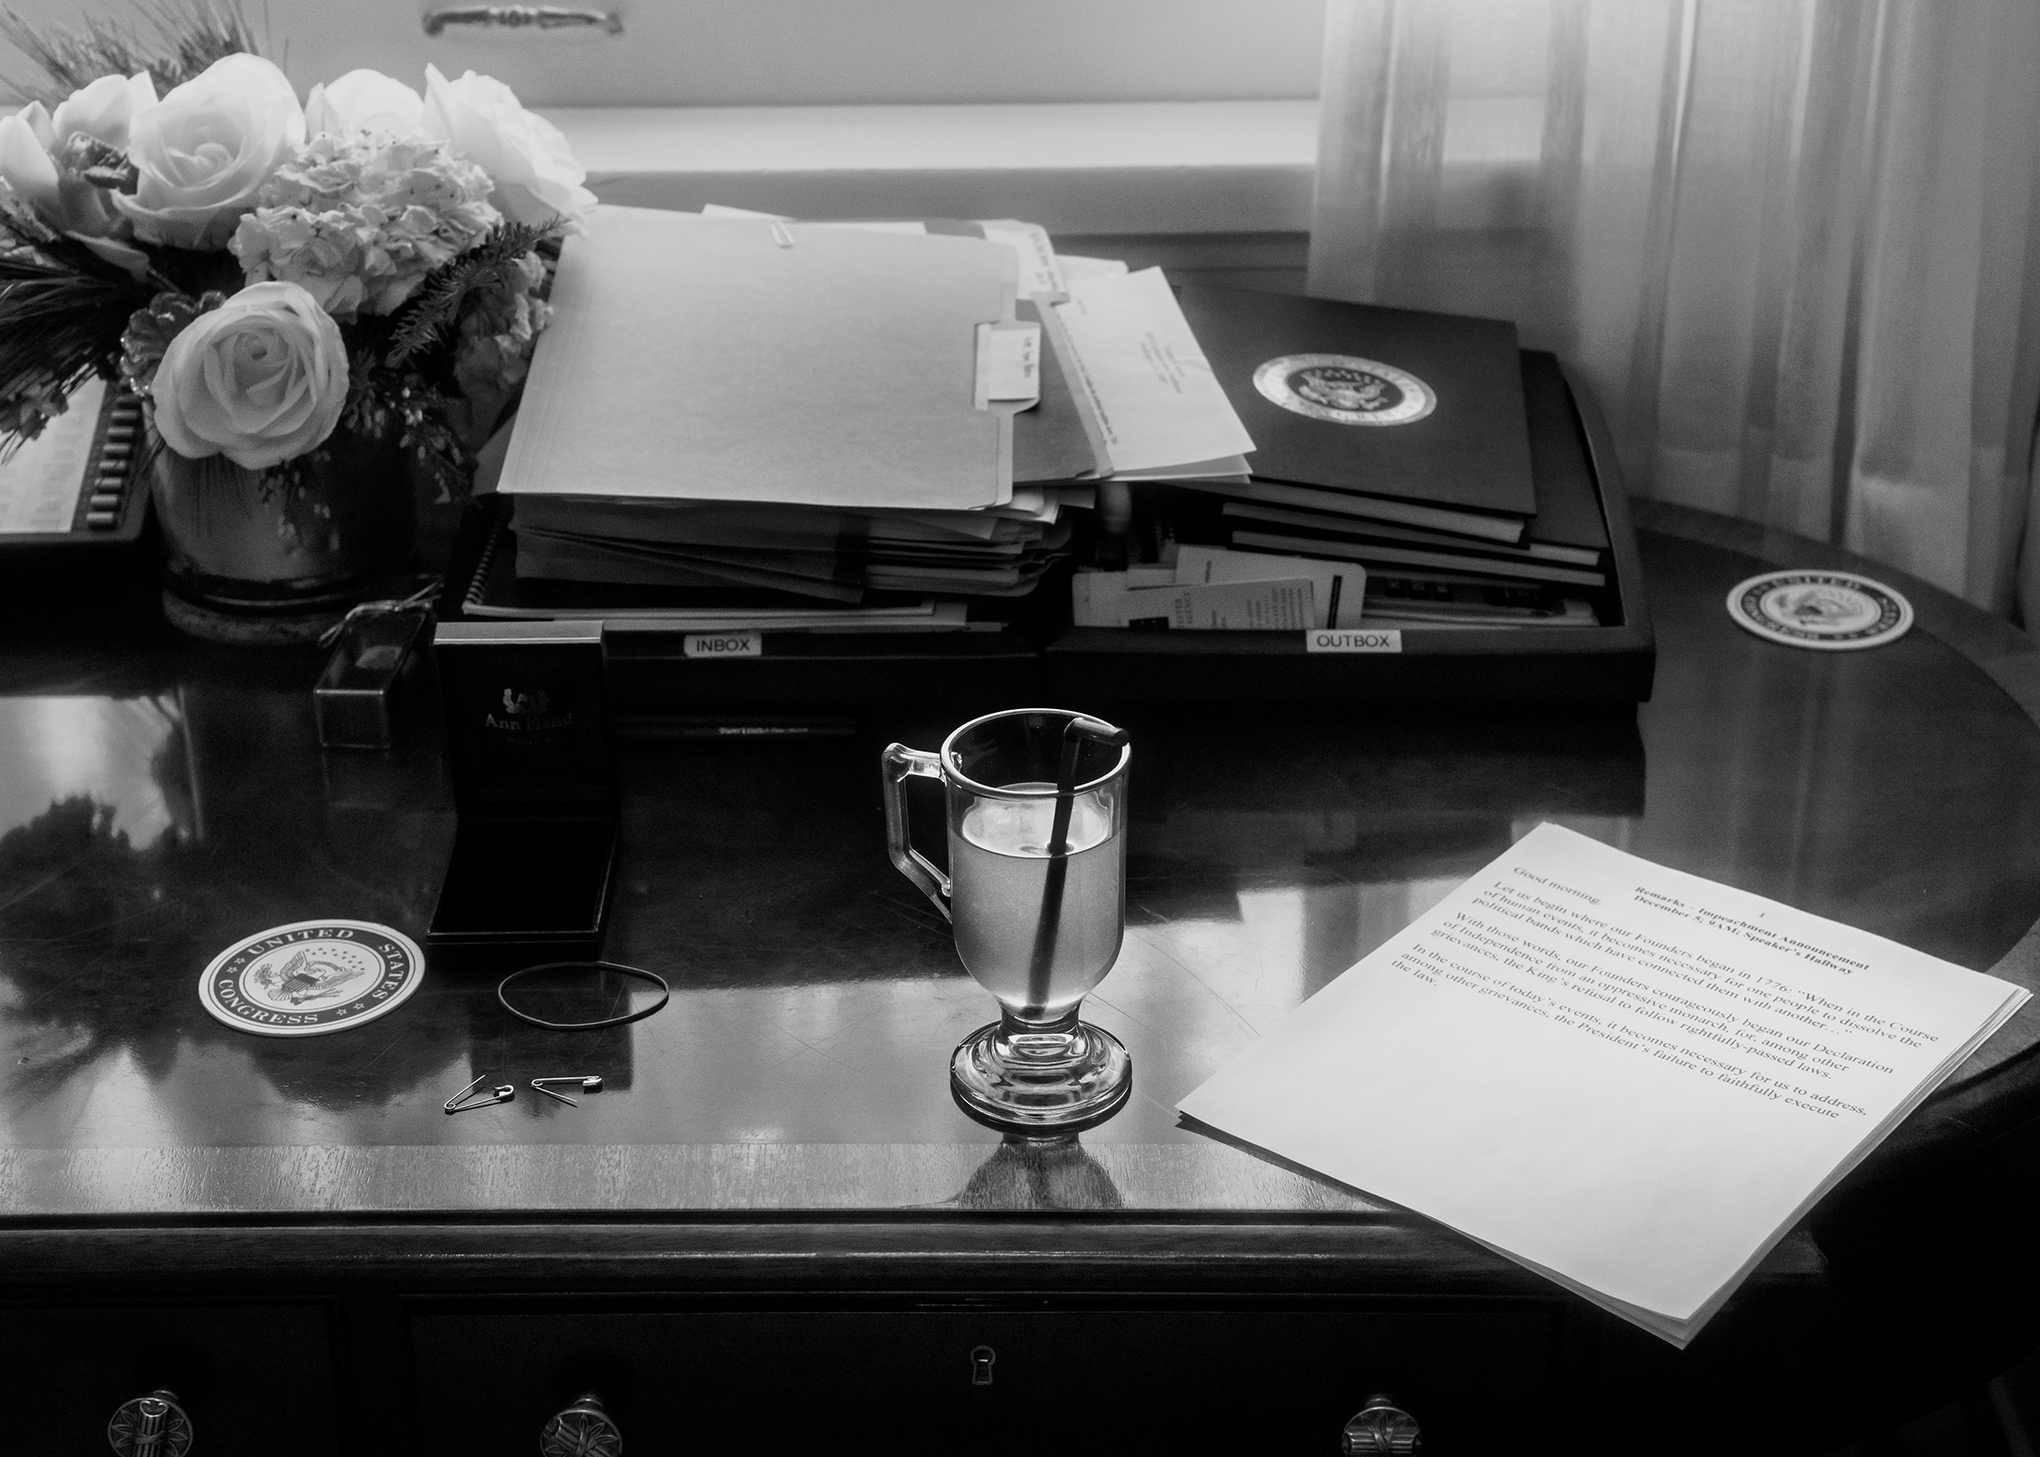 Pelosi's desk in her office at the Capitol on December 5. (Philip Montgomery for TIME)